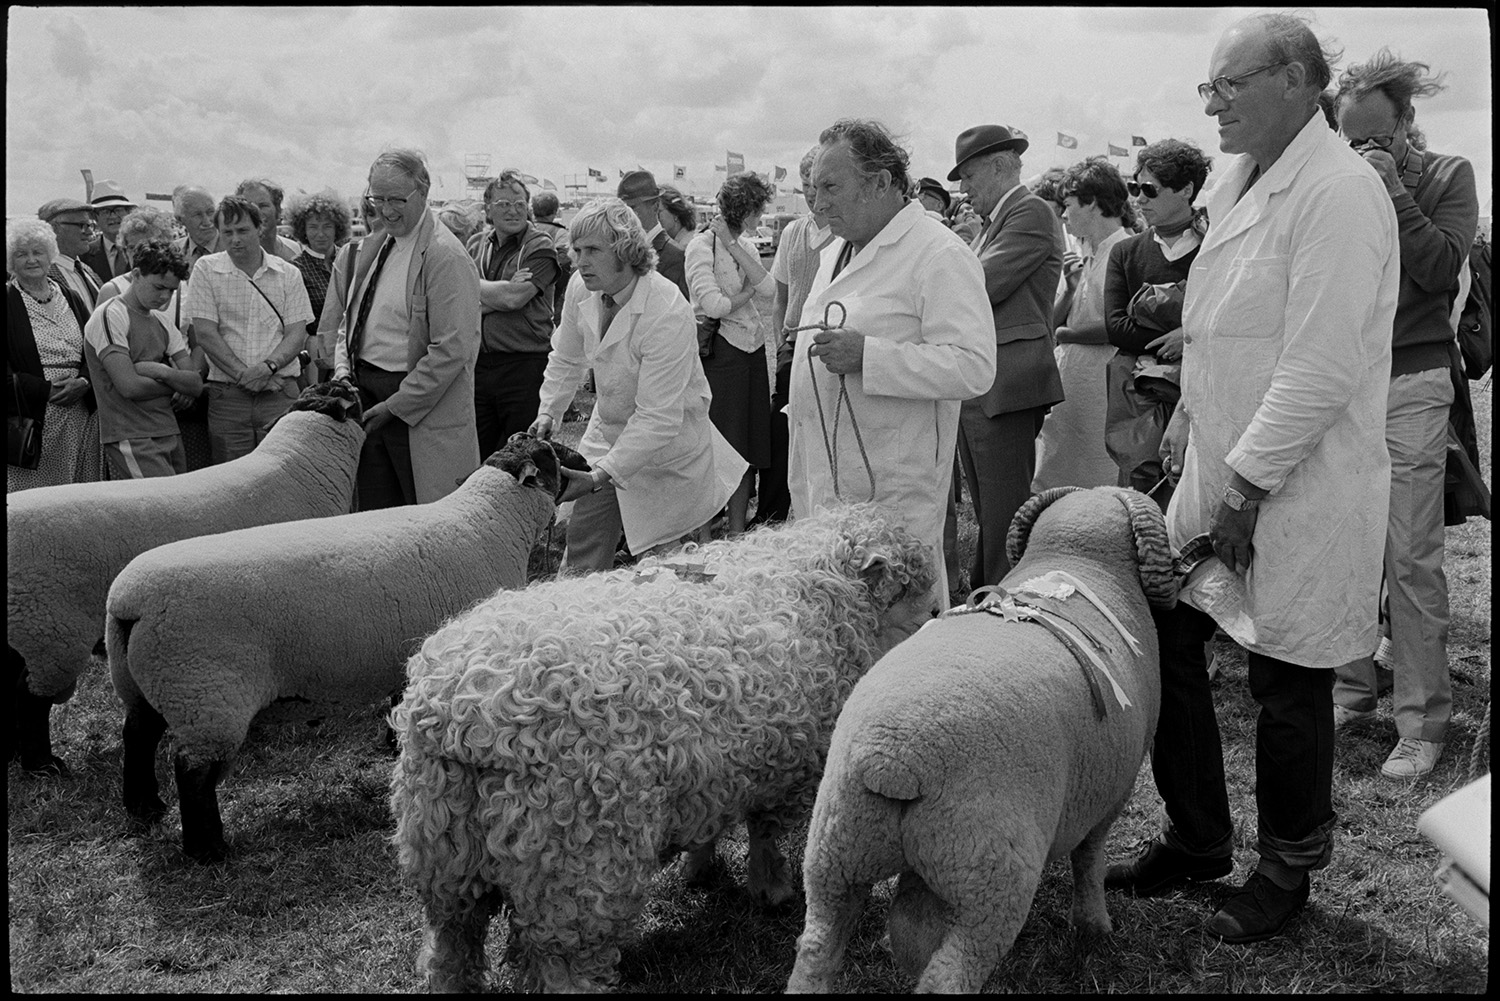 North Devon Show, Prize cattle, sheep, exhibitions etc.
[Four men showing rams at the North Devon Show near Alverdiscott. One of the rams is wearing rosettes. Visitors to the Show are watching in the background.]